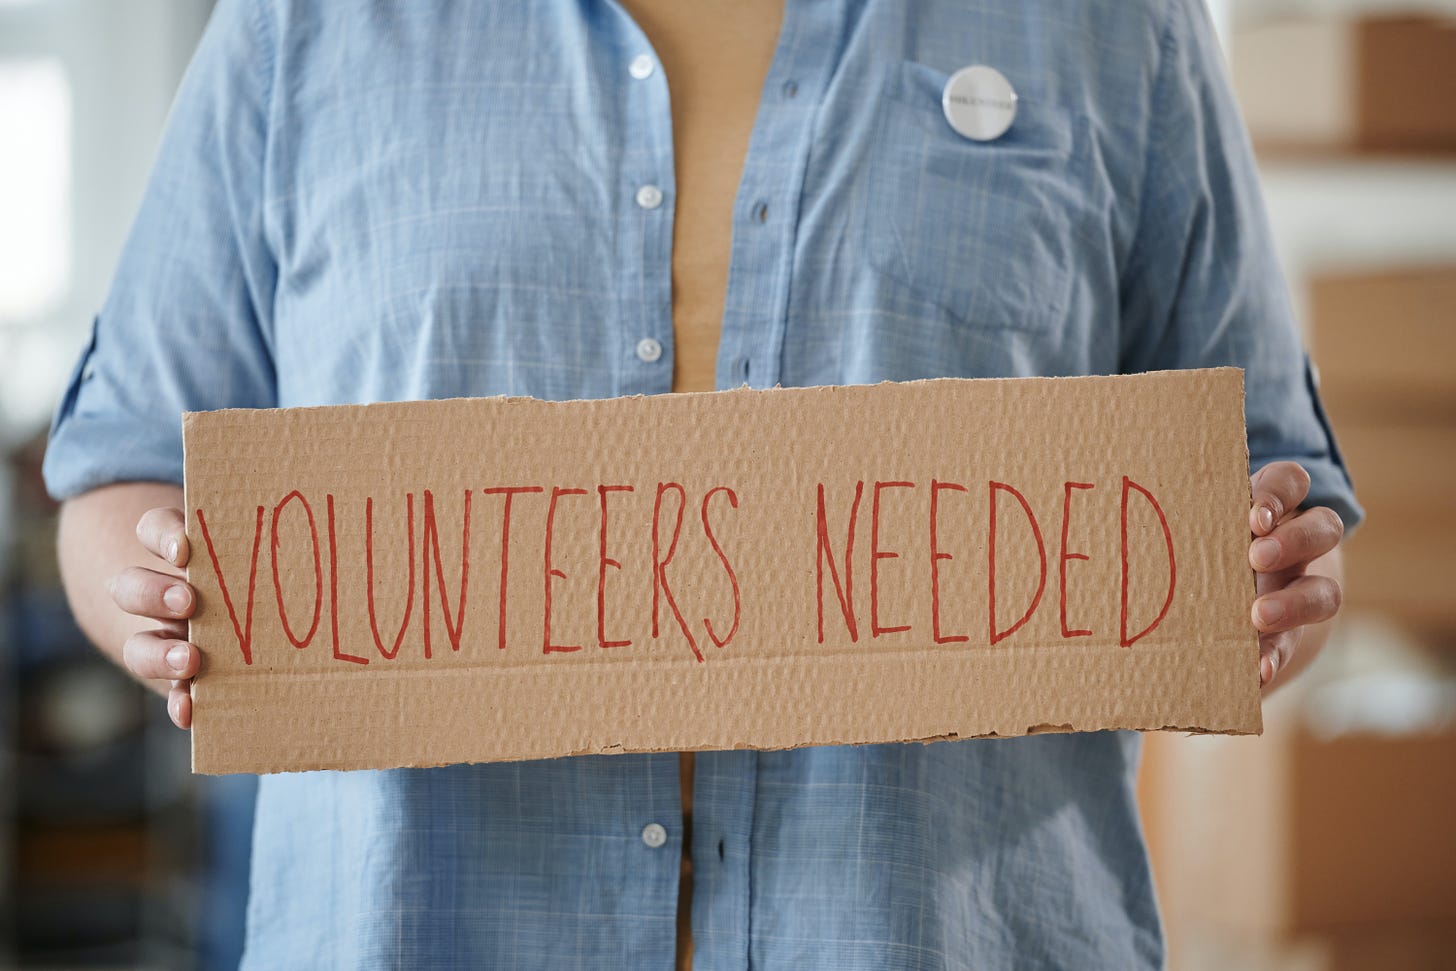 A person wearing a blue shirt holding a sign that says "Volunteers Needed."